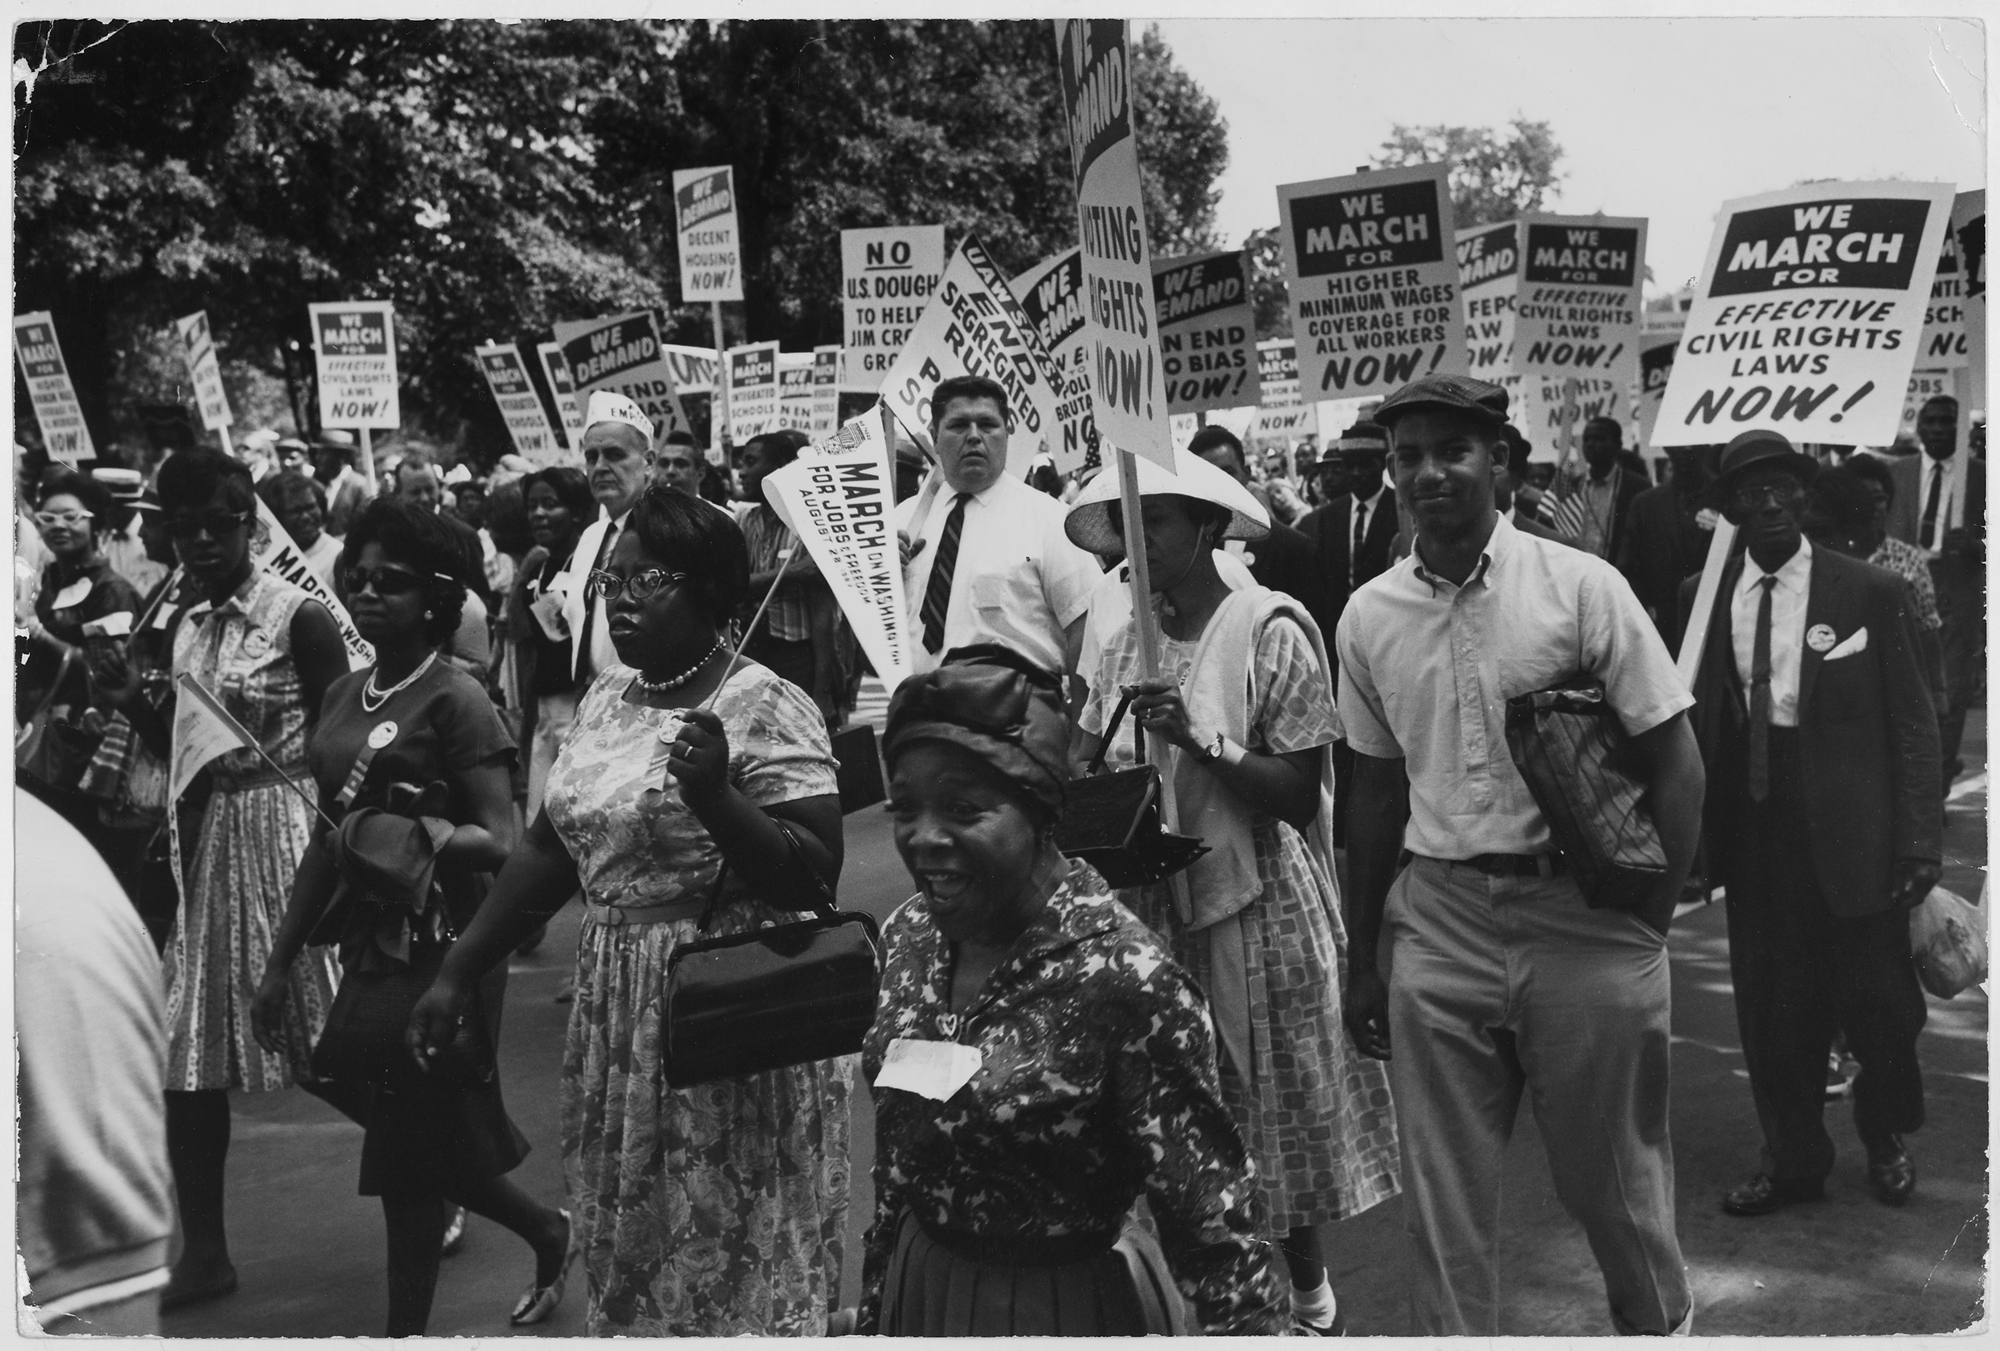 Advancing Equality: Exploring 19th Century Civil Rights Movements